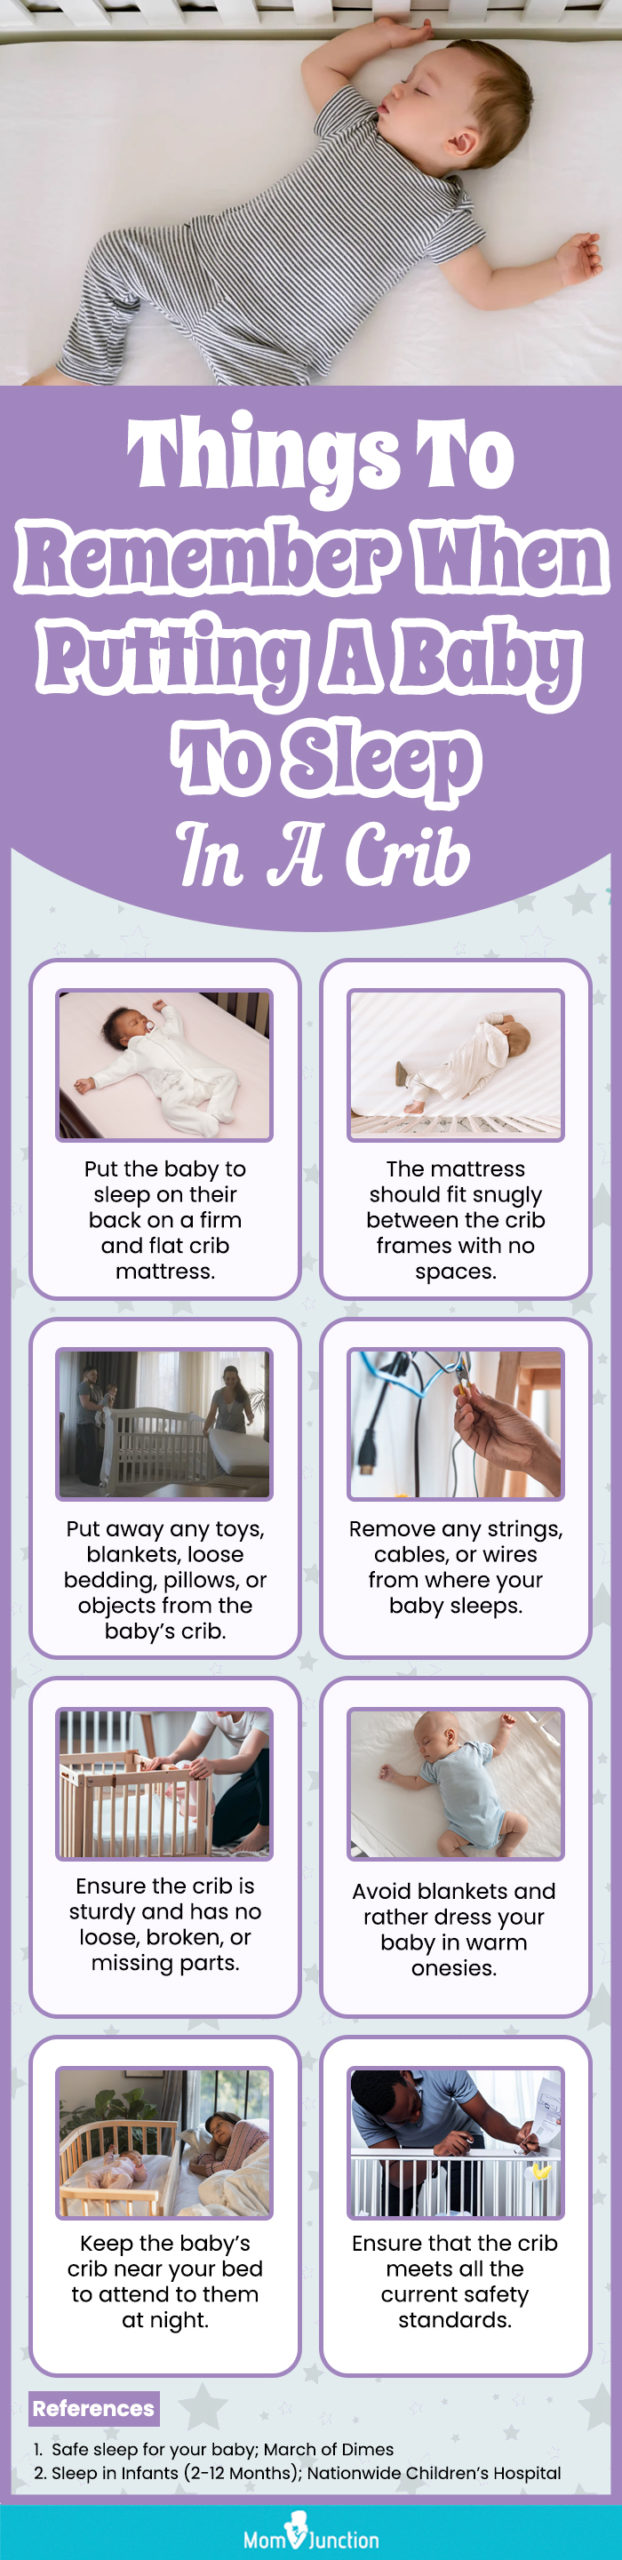 Things To Remember When Putting Baby To Sleep In A Crib (infographic)